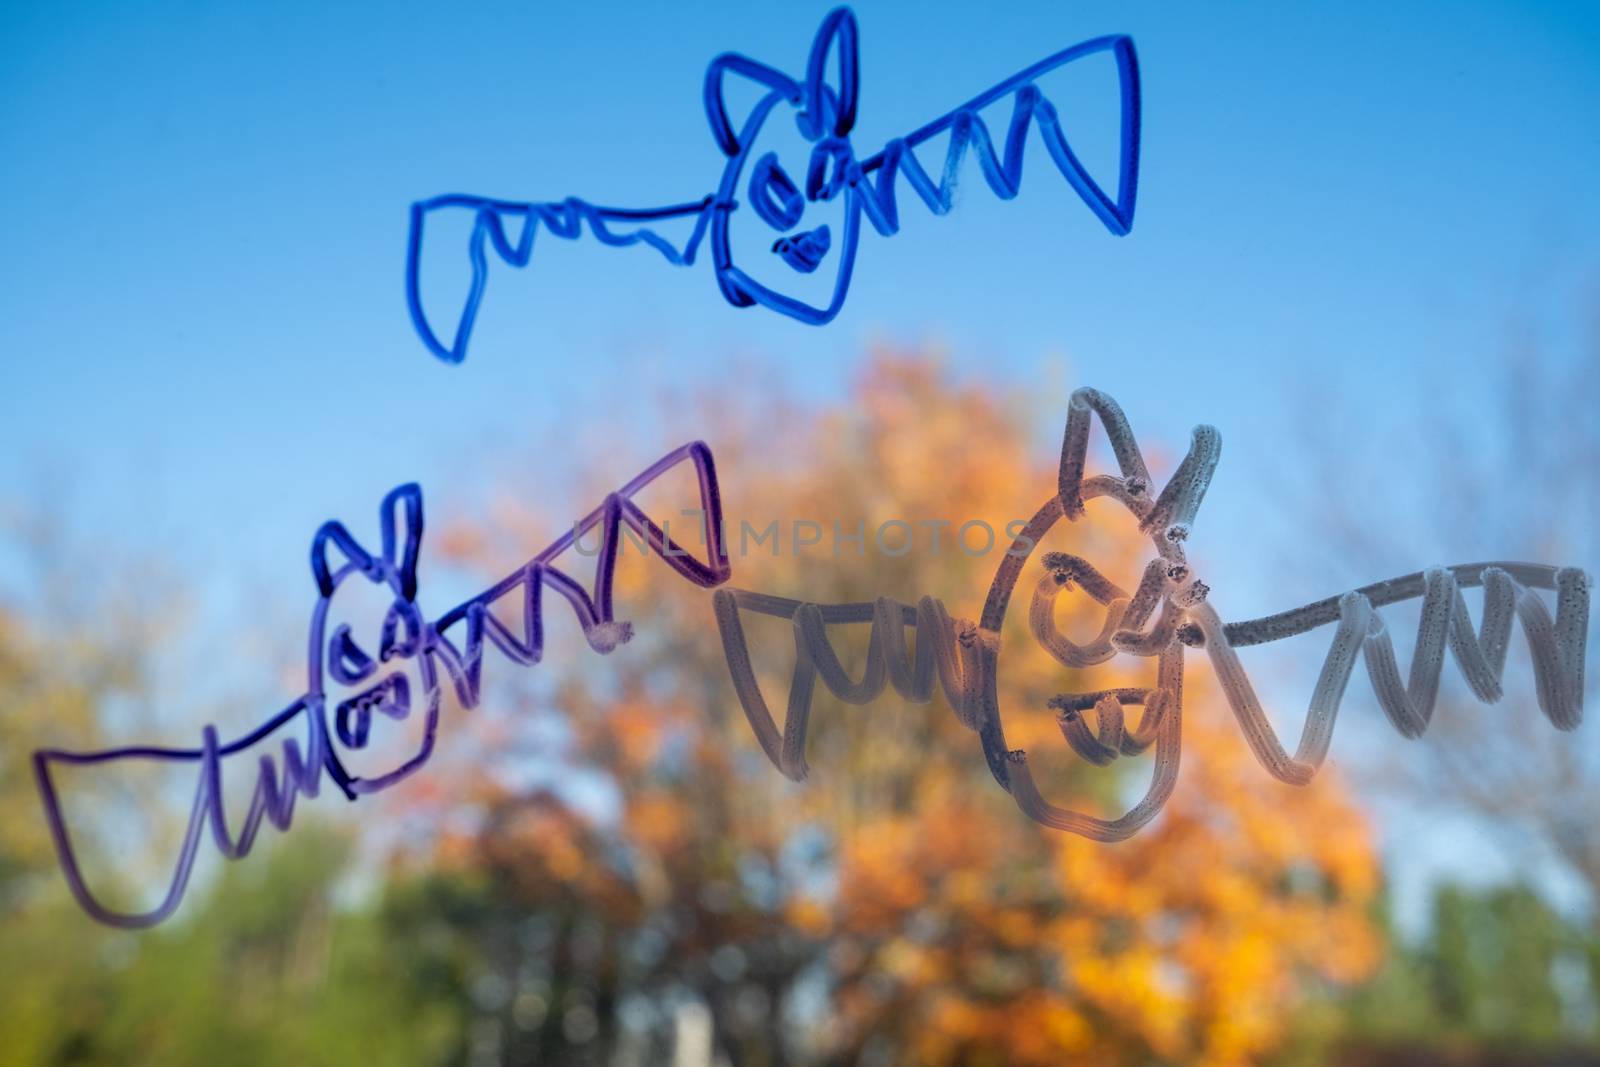 Drawings of vampire bats done by a child in marker adorn a window in October, symbolizing an indoor Halloween for 2020.